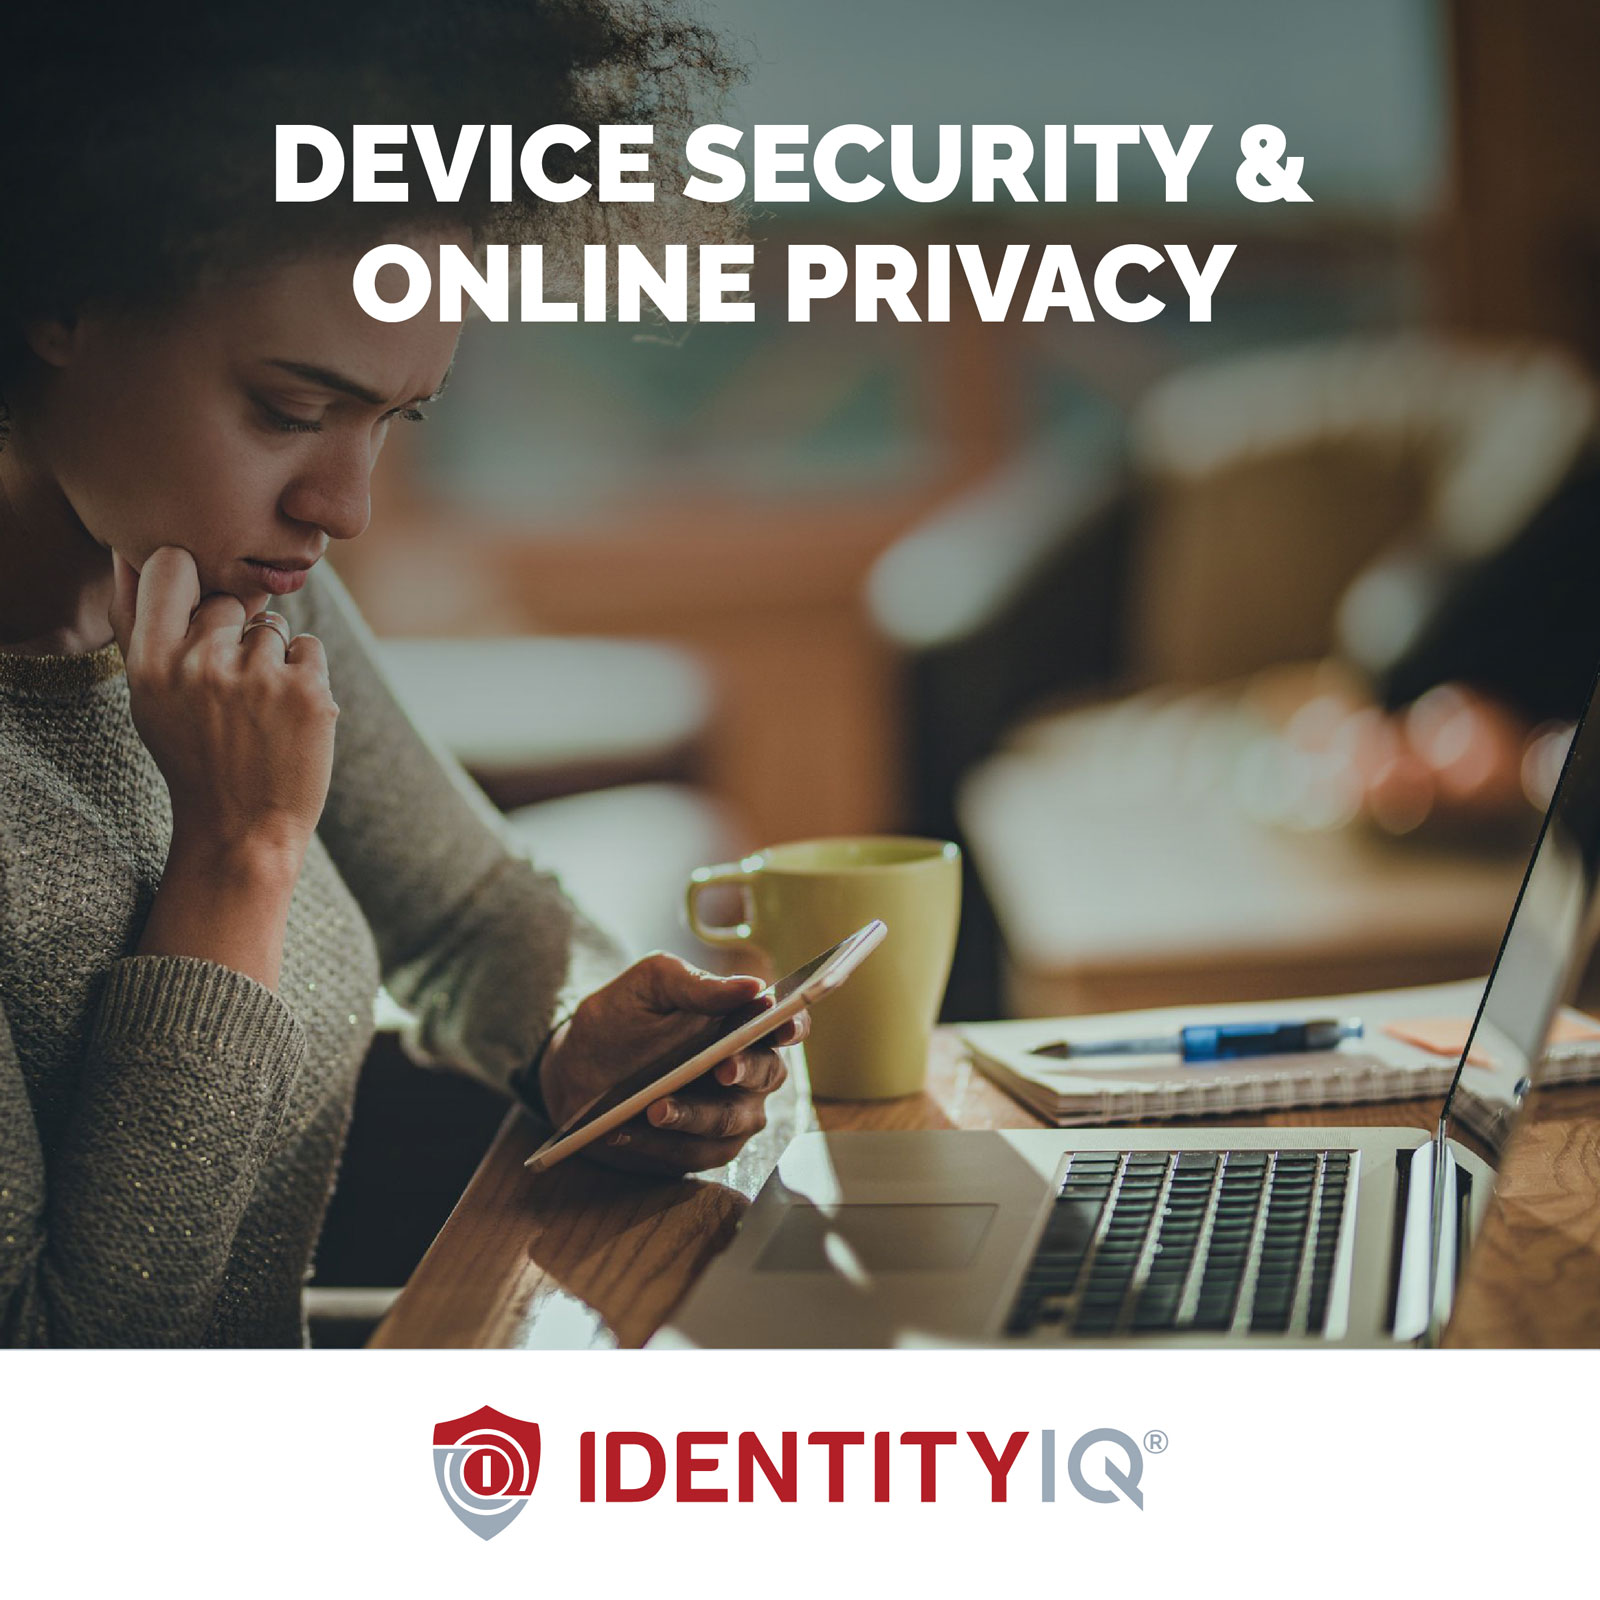 Device security and online privacy on your laptop